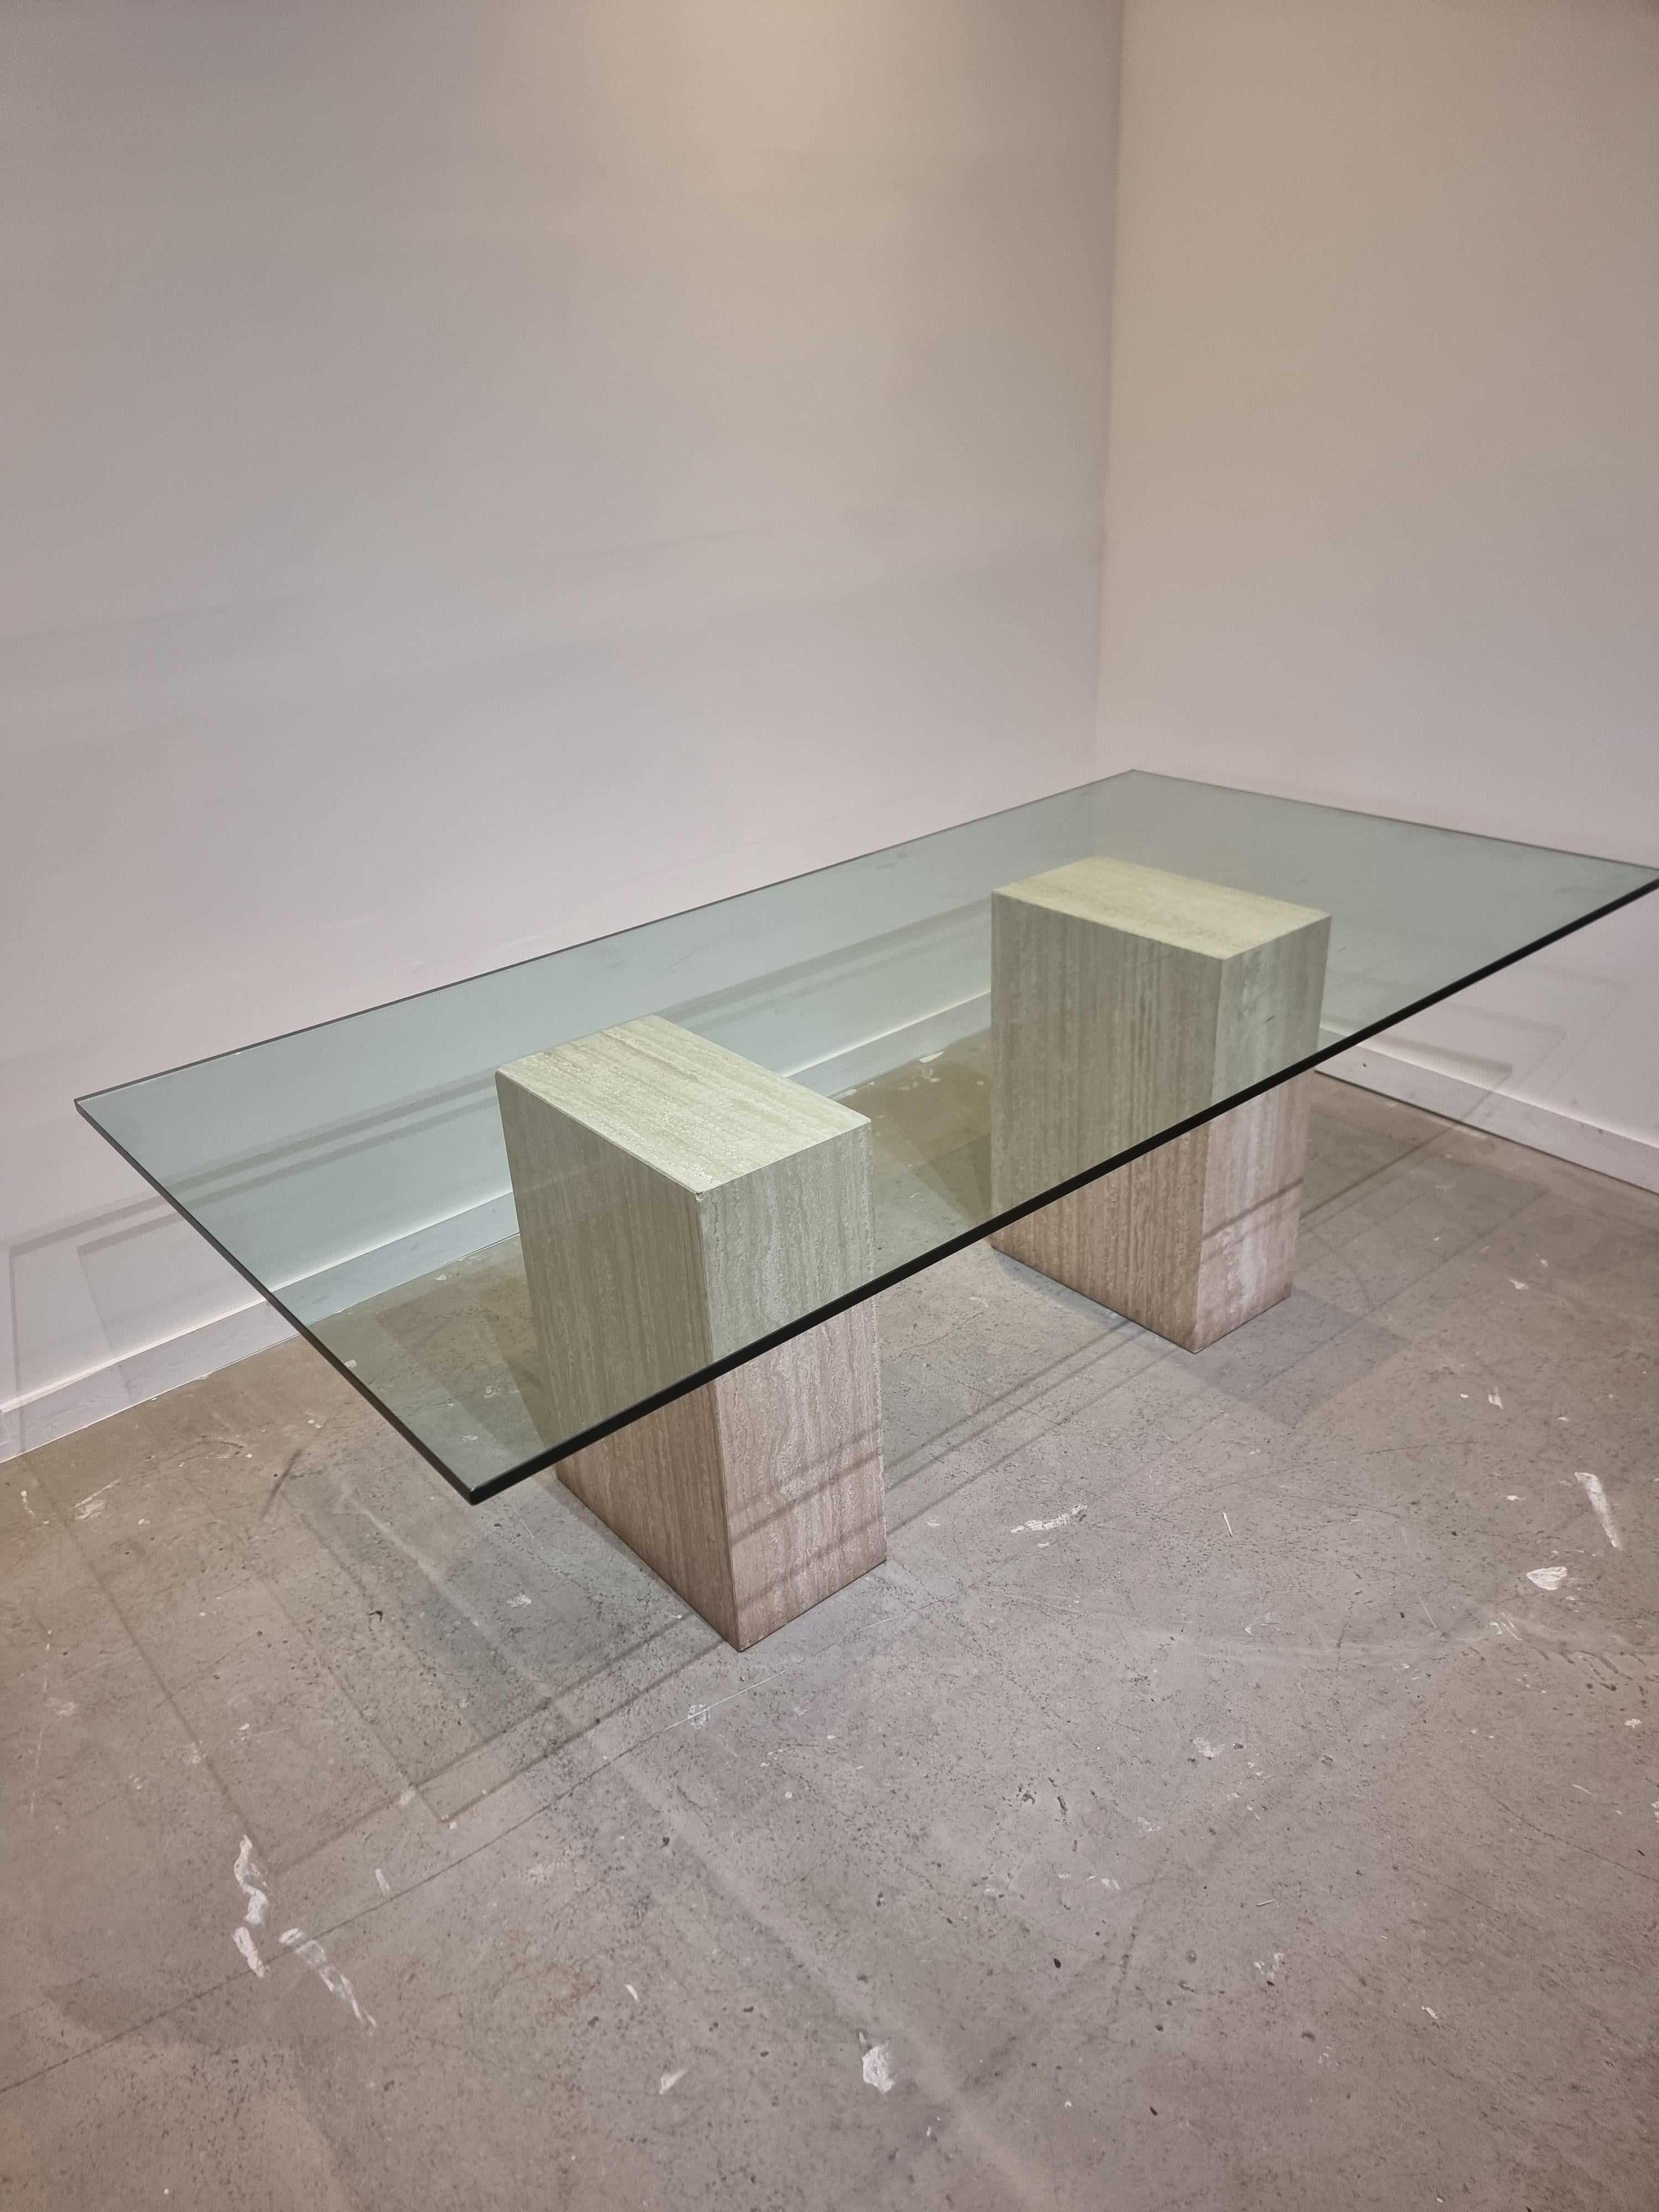 Postmodern piece in travertine marble that can be used as a writing desk or dining table. Fits 6 to 8 persons.

The two impressive travertine columns are not attached to the thick glass tabletop, these can be placed freely underneath the top. 

In